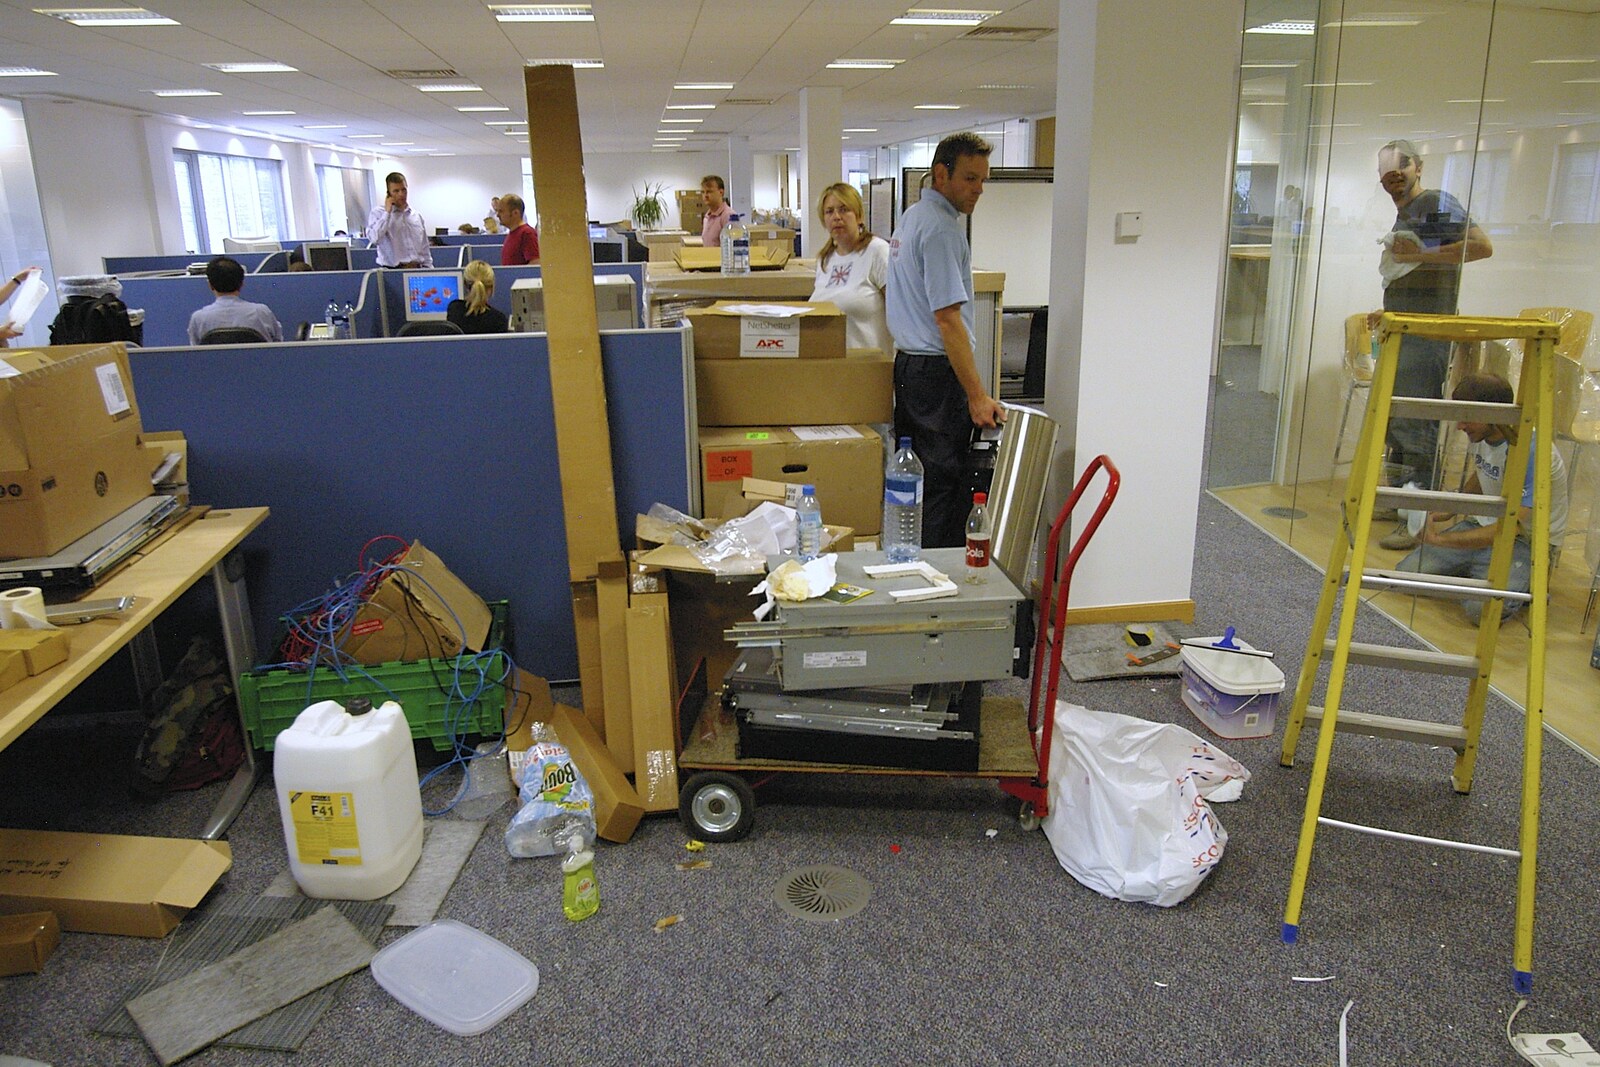 Downstairs is a bit chaotic from Qualcomm Moves Offices, Milton Road, Cambridge - 26th July 2006